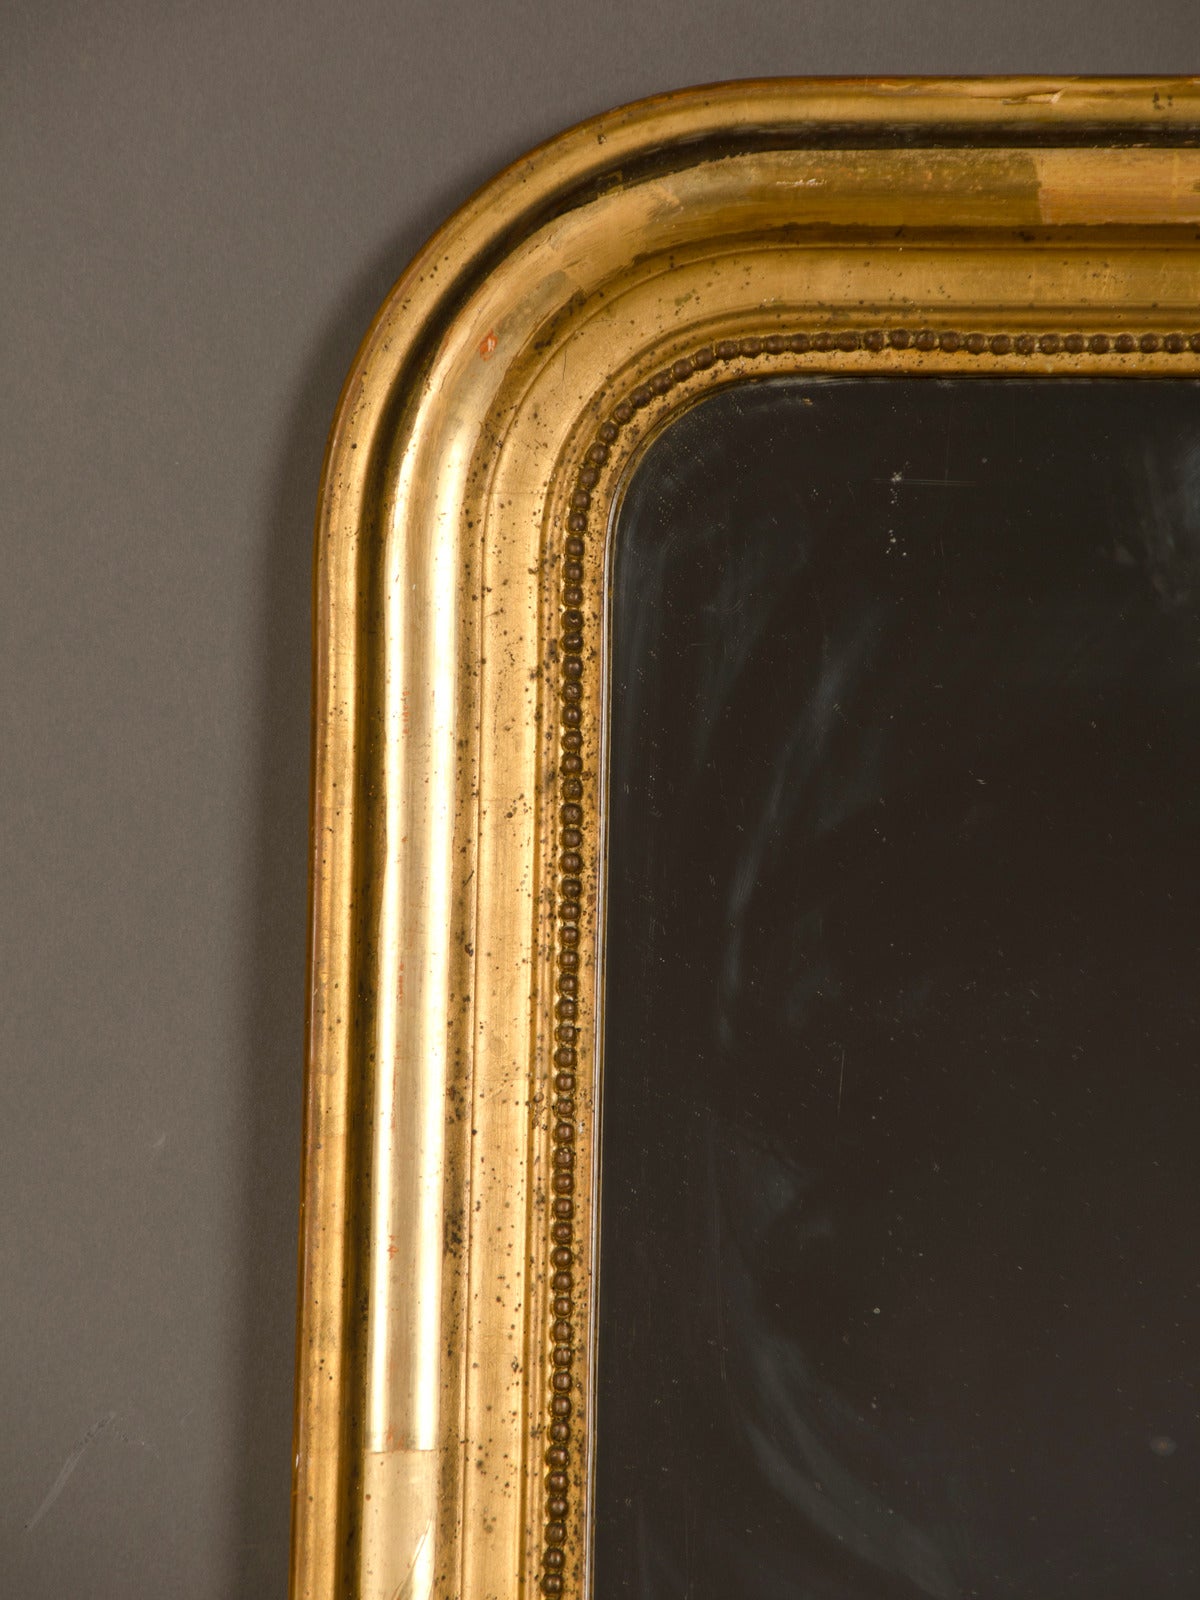 A handsome Louis Philippe style gold leaf frame enclosing the original mirror glass from Belle Epoque period  France c.1895. Please take a moment to use the zoom feature on our website to enlarge all the provided photographs to see the wonderful